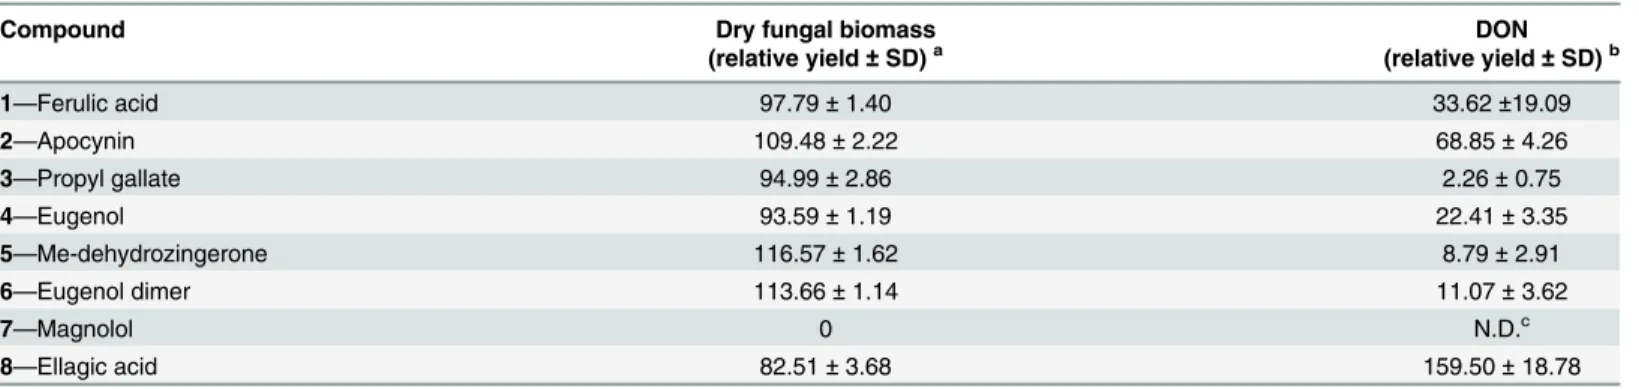 Table 1. In vitro effect of tested compounds on total trichothecene (DON) production by Fusarium culmorum FcUK99.